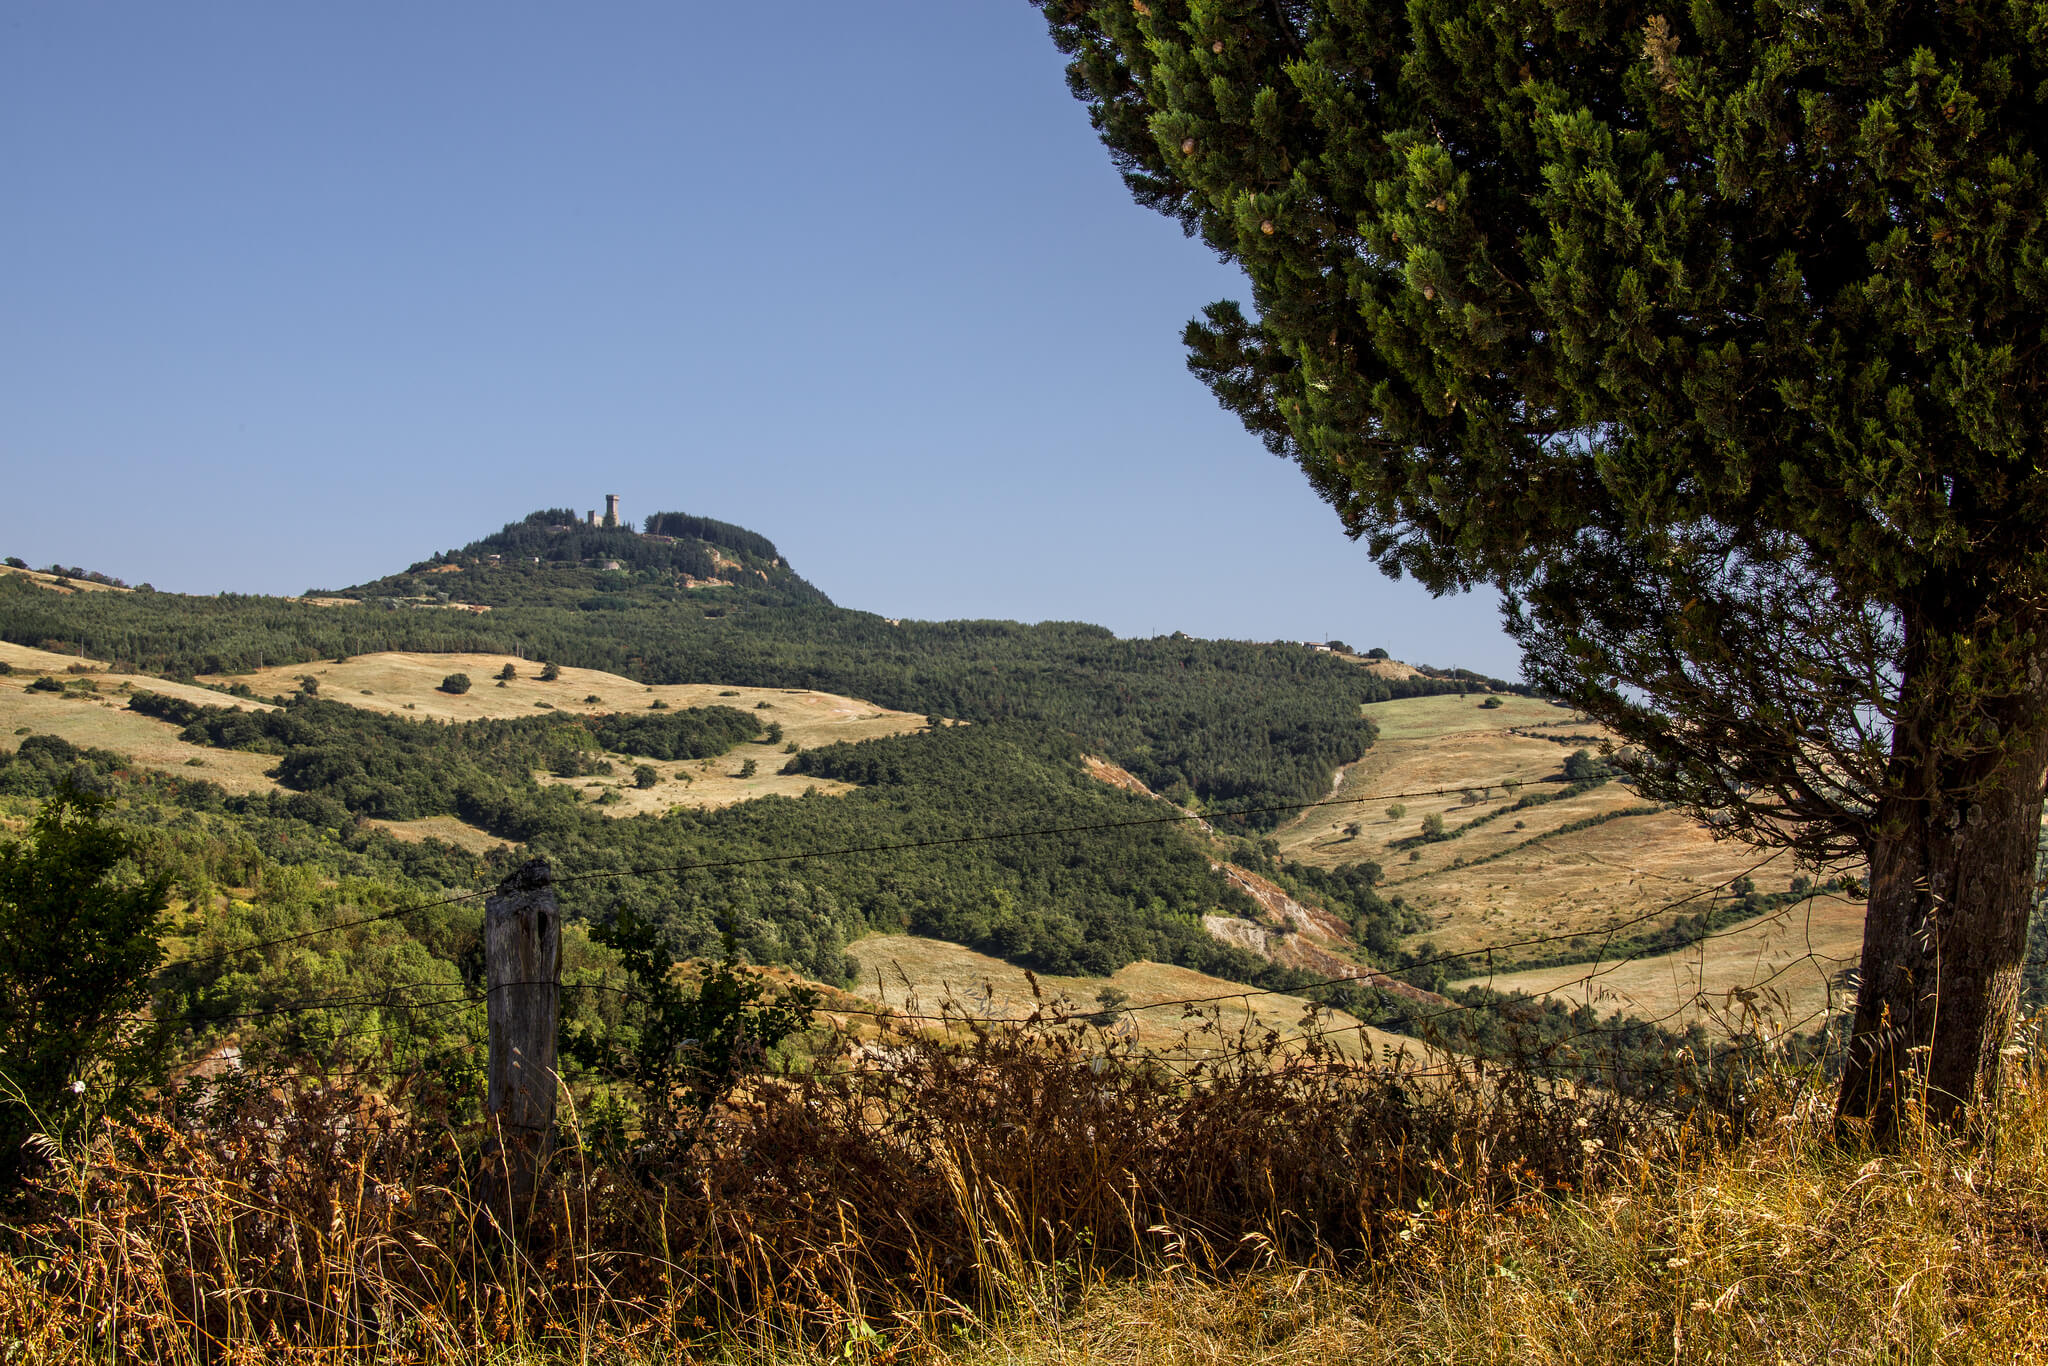 A hill landscape of Tuscany, where woods and fields alternate. At the bottom, on the left there is the hill where Radicofani rises